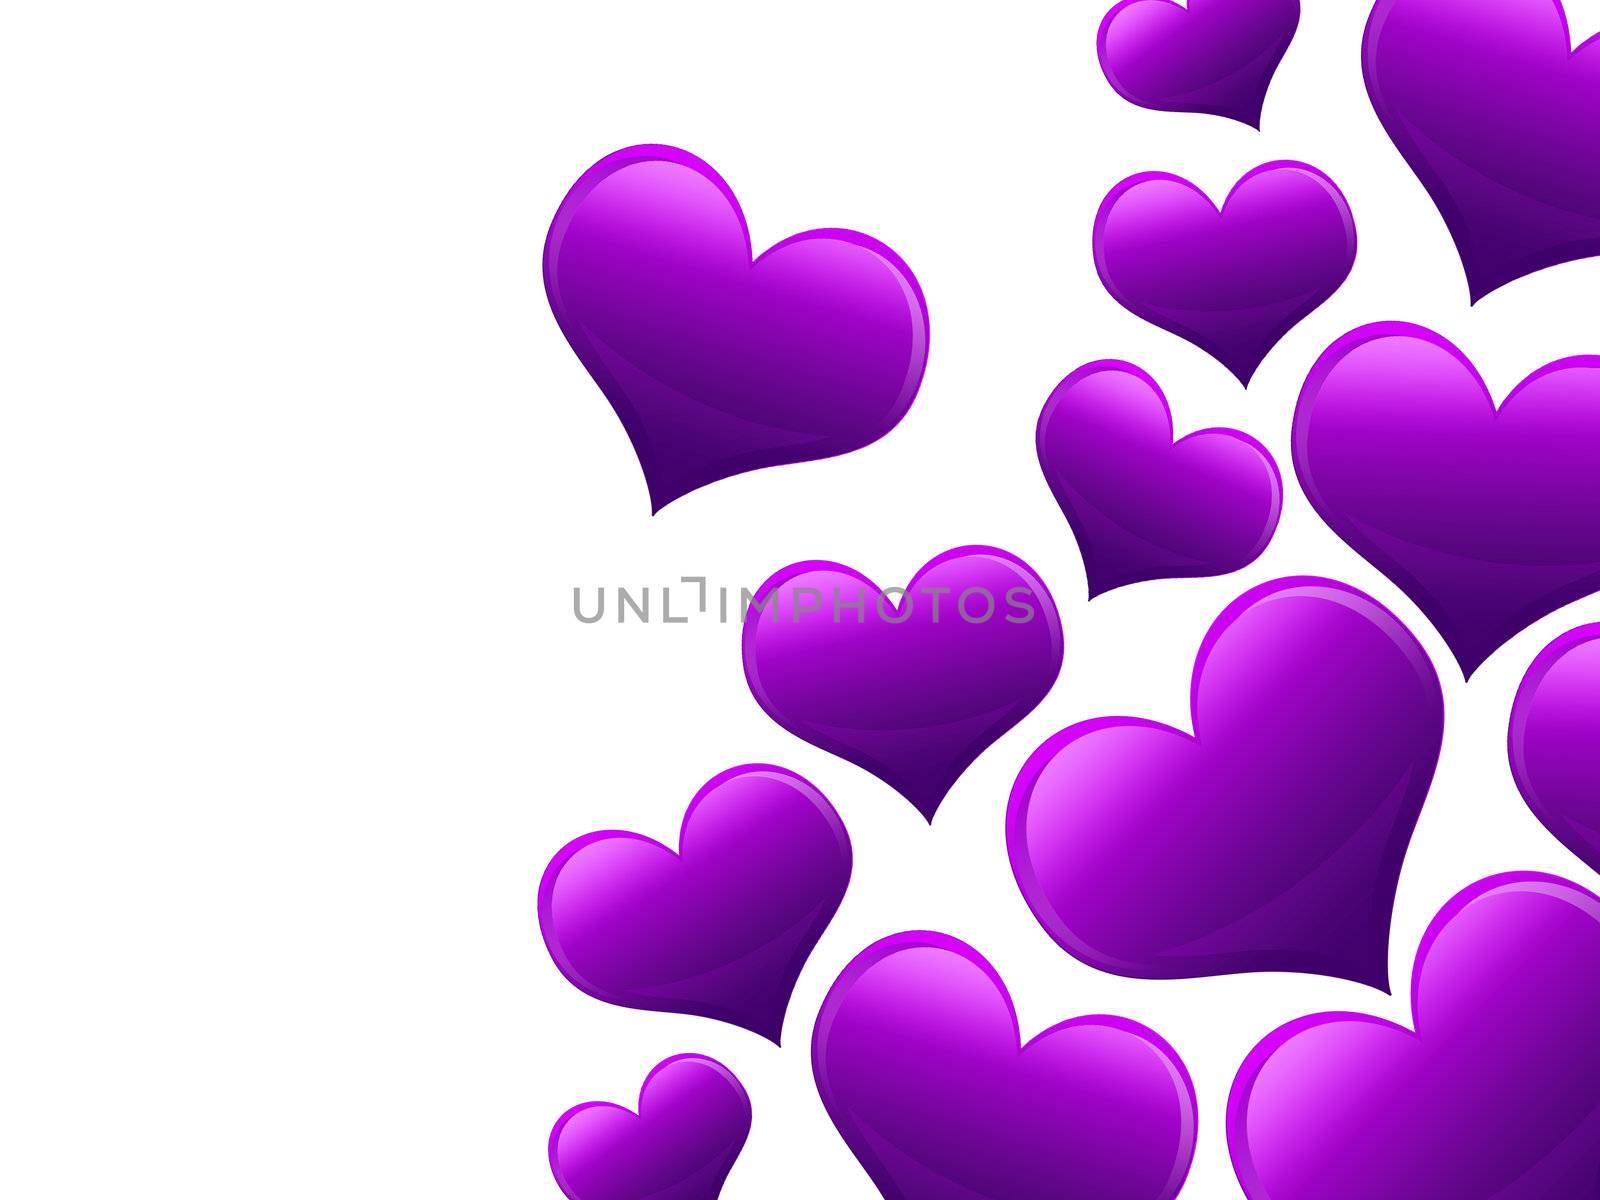 Valentines Day Card with Hearts all in  purple